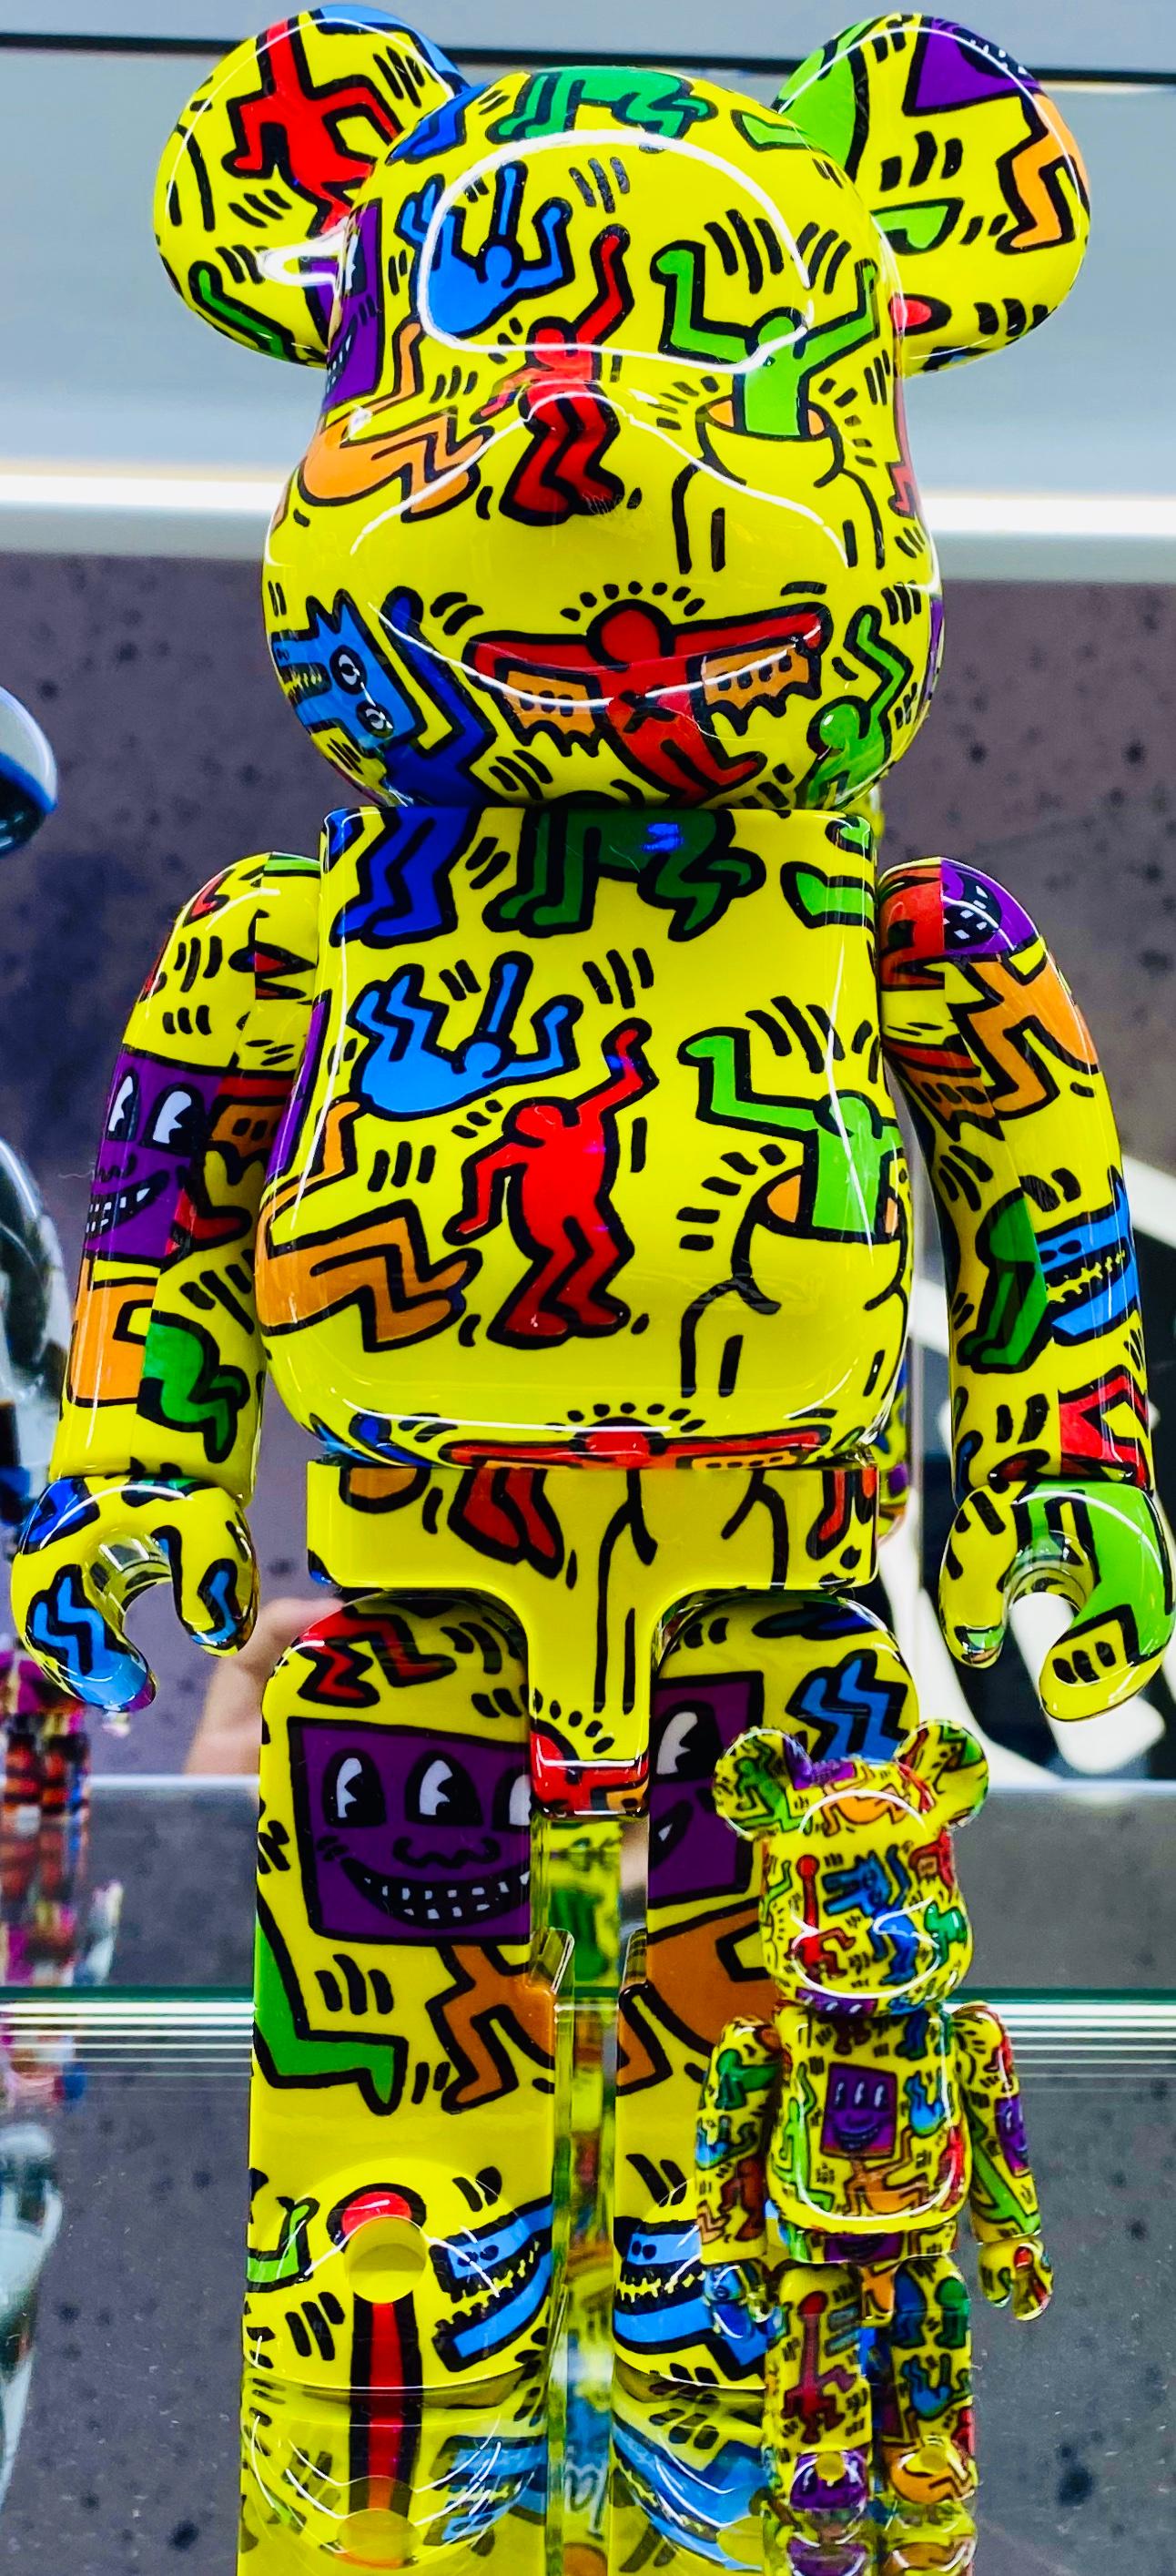 (after) Keith Haring Figurative Sculpture – Keith Haring Bearbrick 400 % Companion (Haring BE@RBRICK)